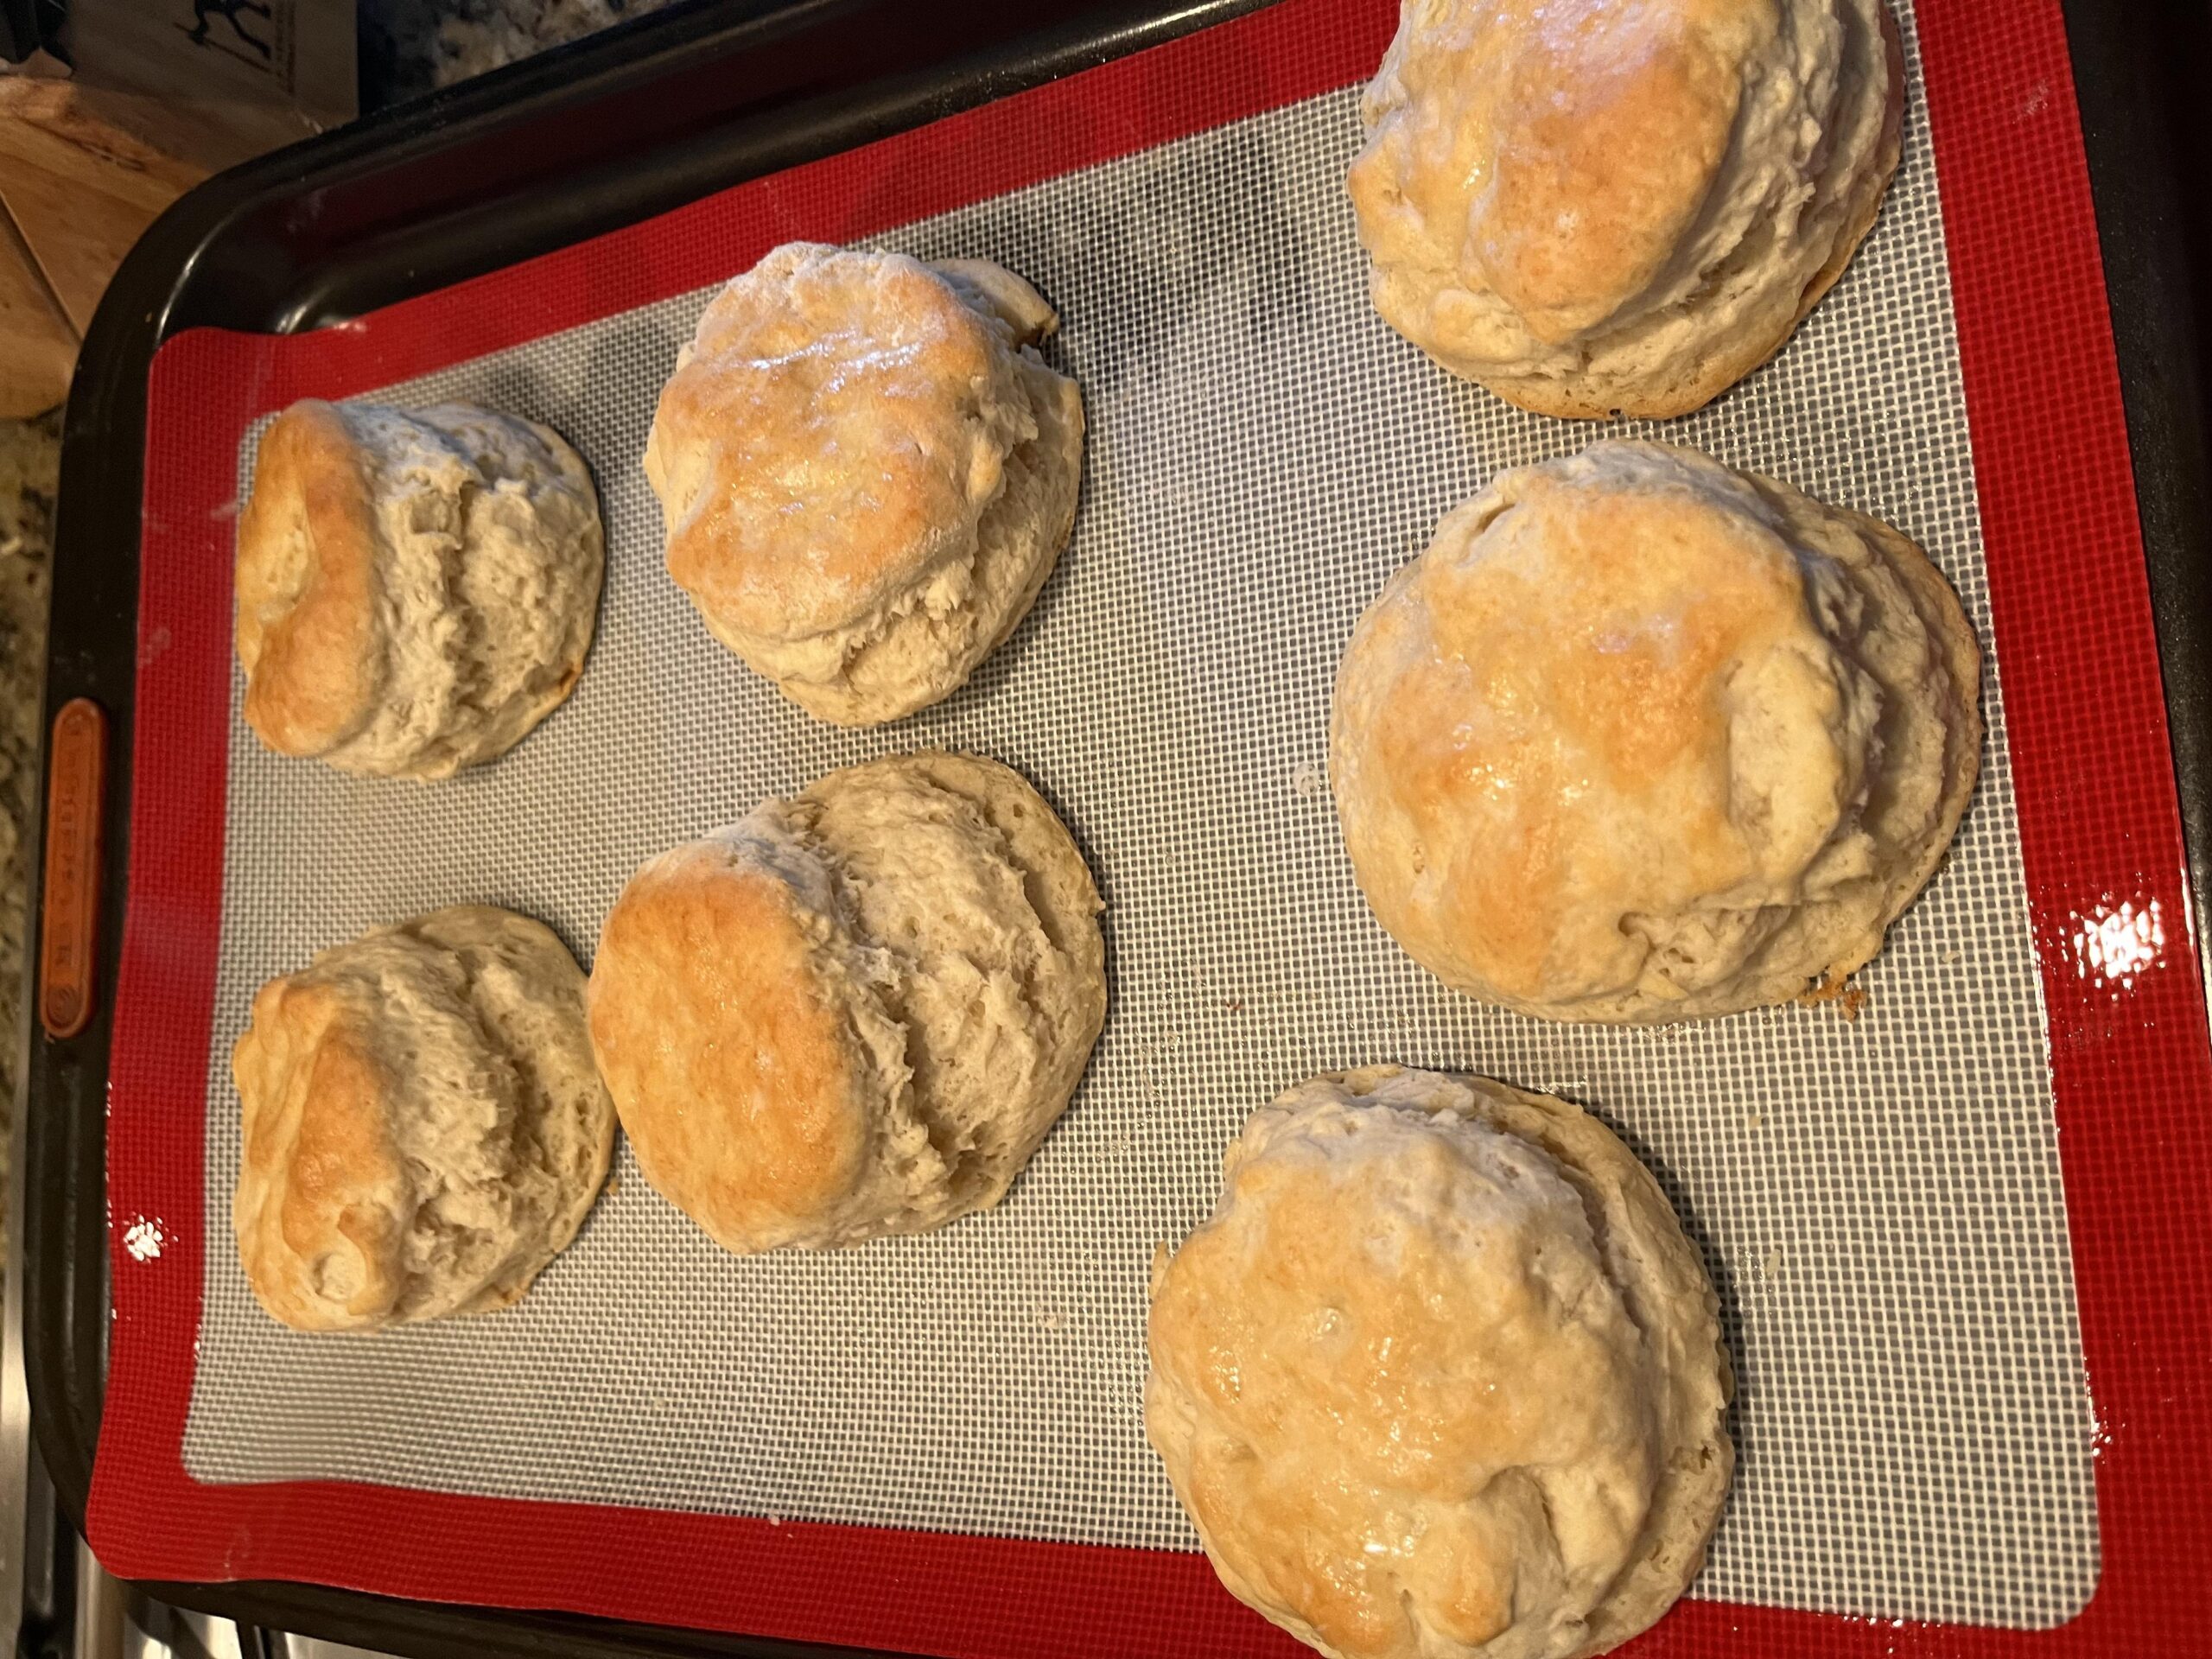  The perfect buttery biscuit, straight from the oven